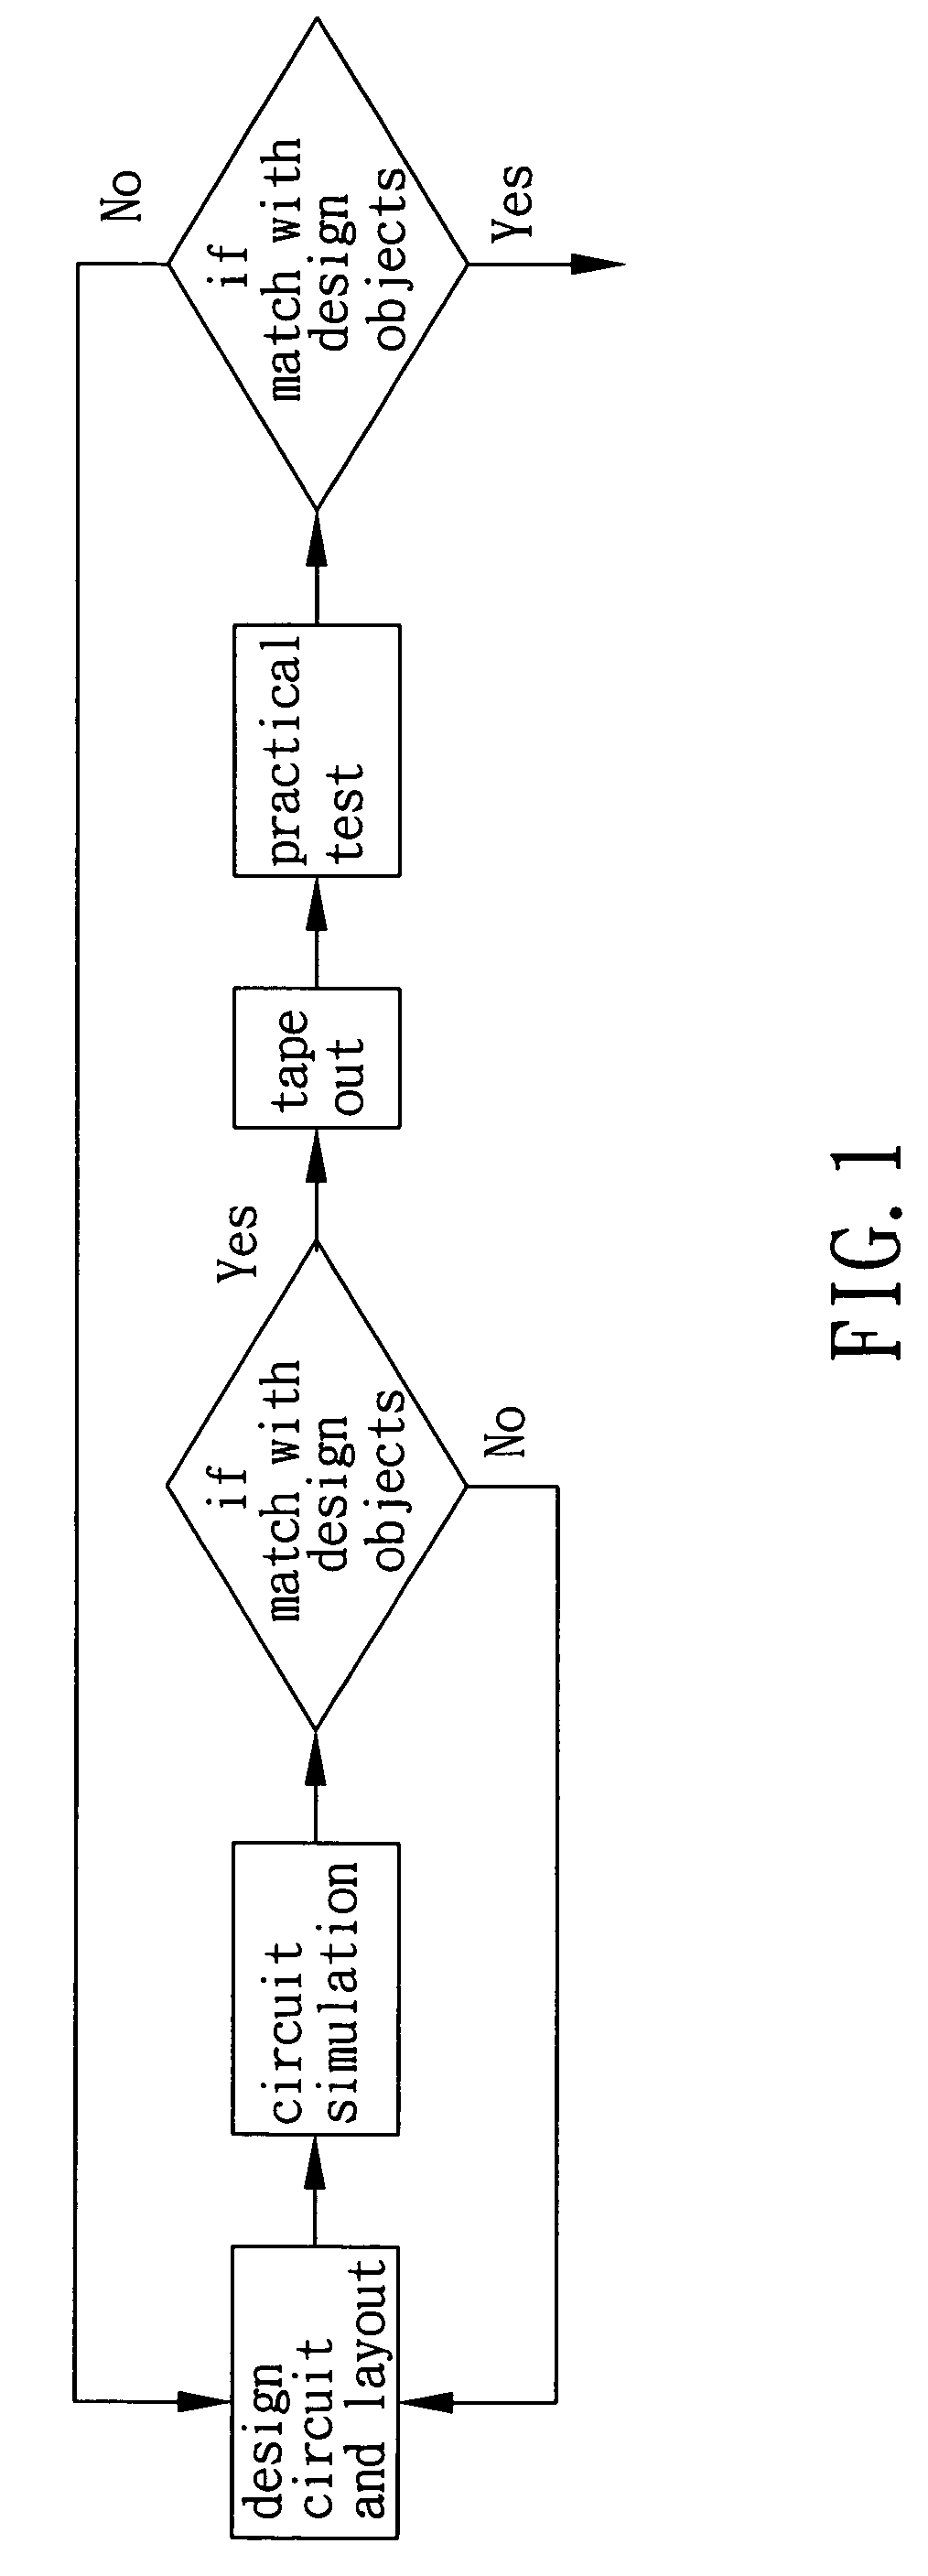 Integrated circuit structure and a design method thereof